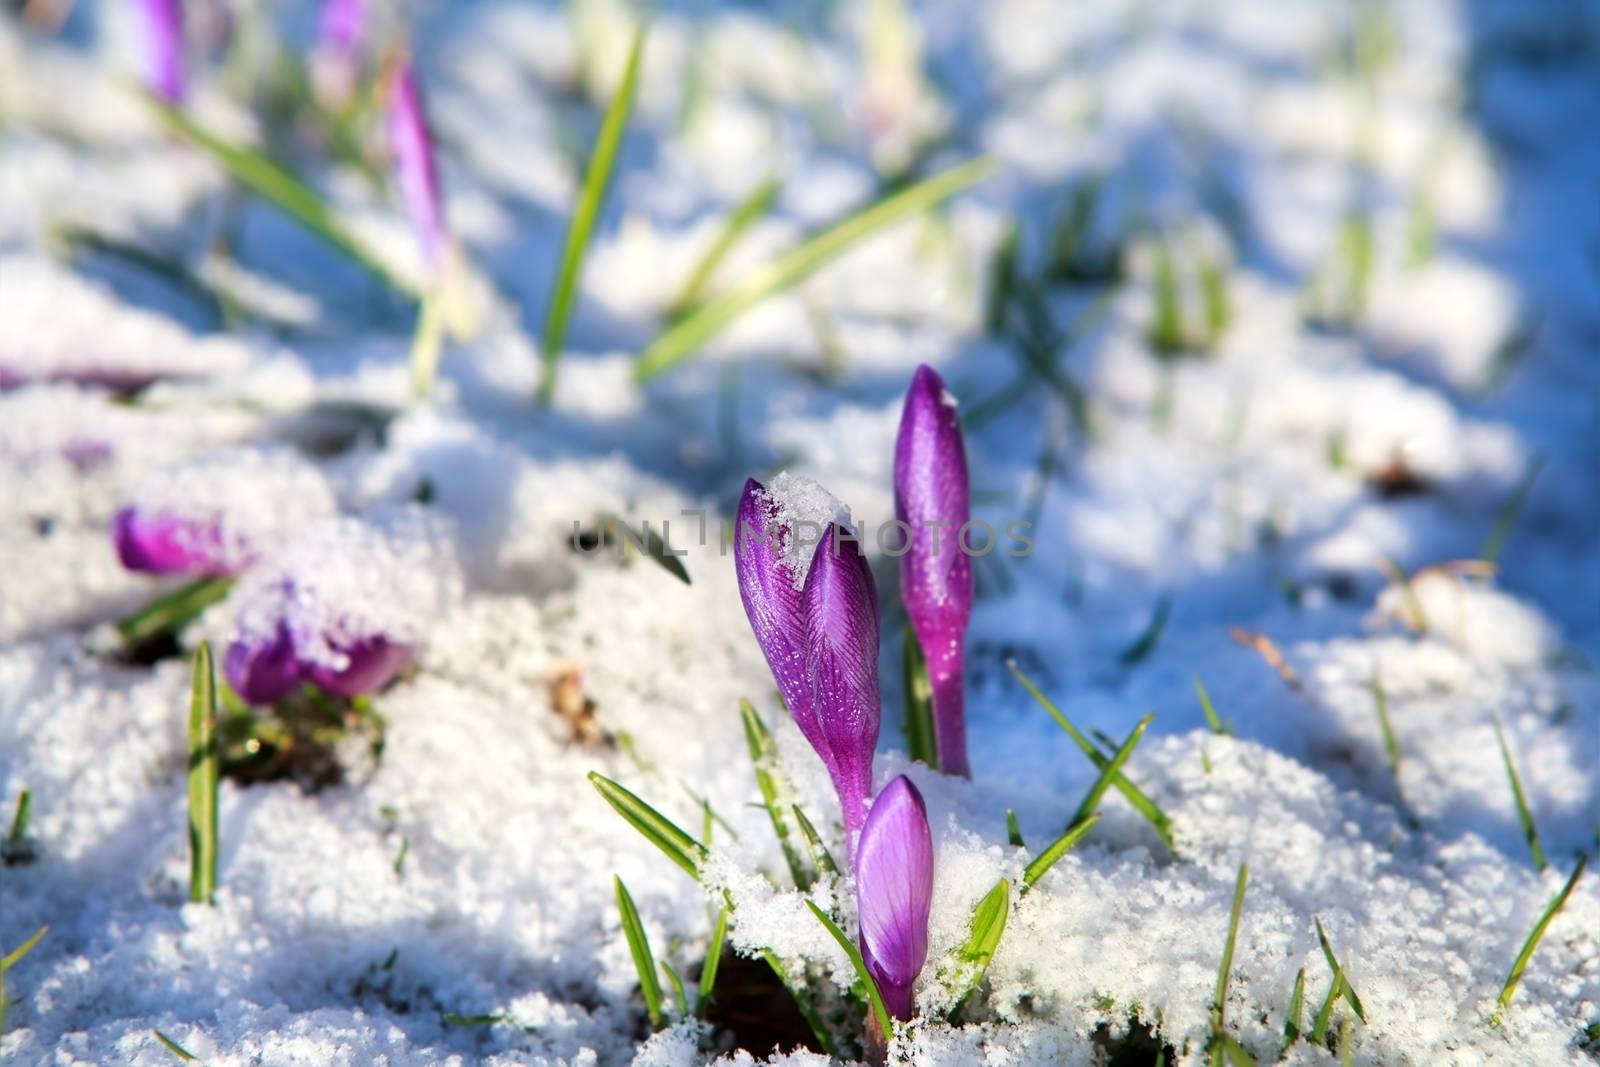 crocus flowers in snow by catolla